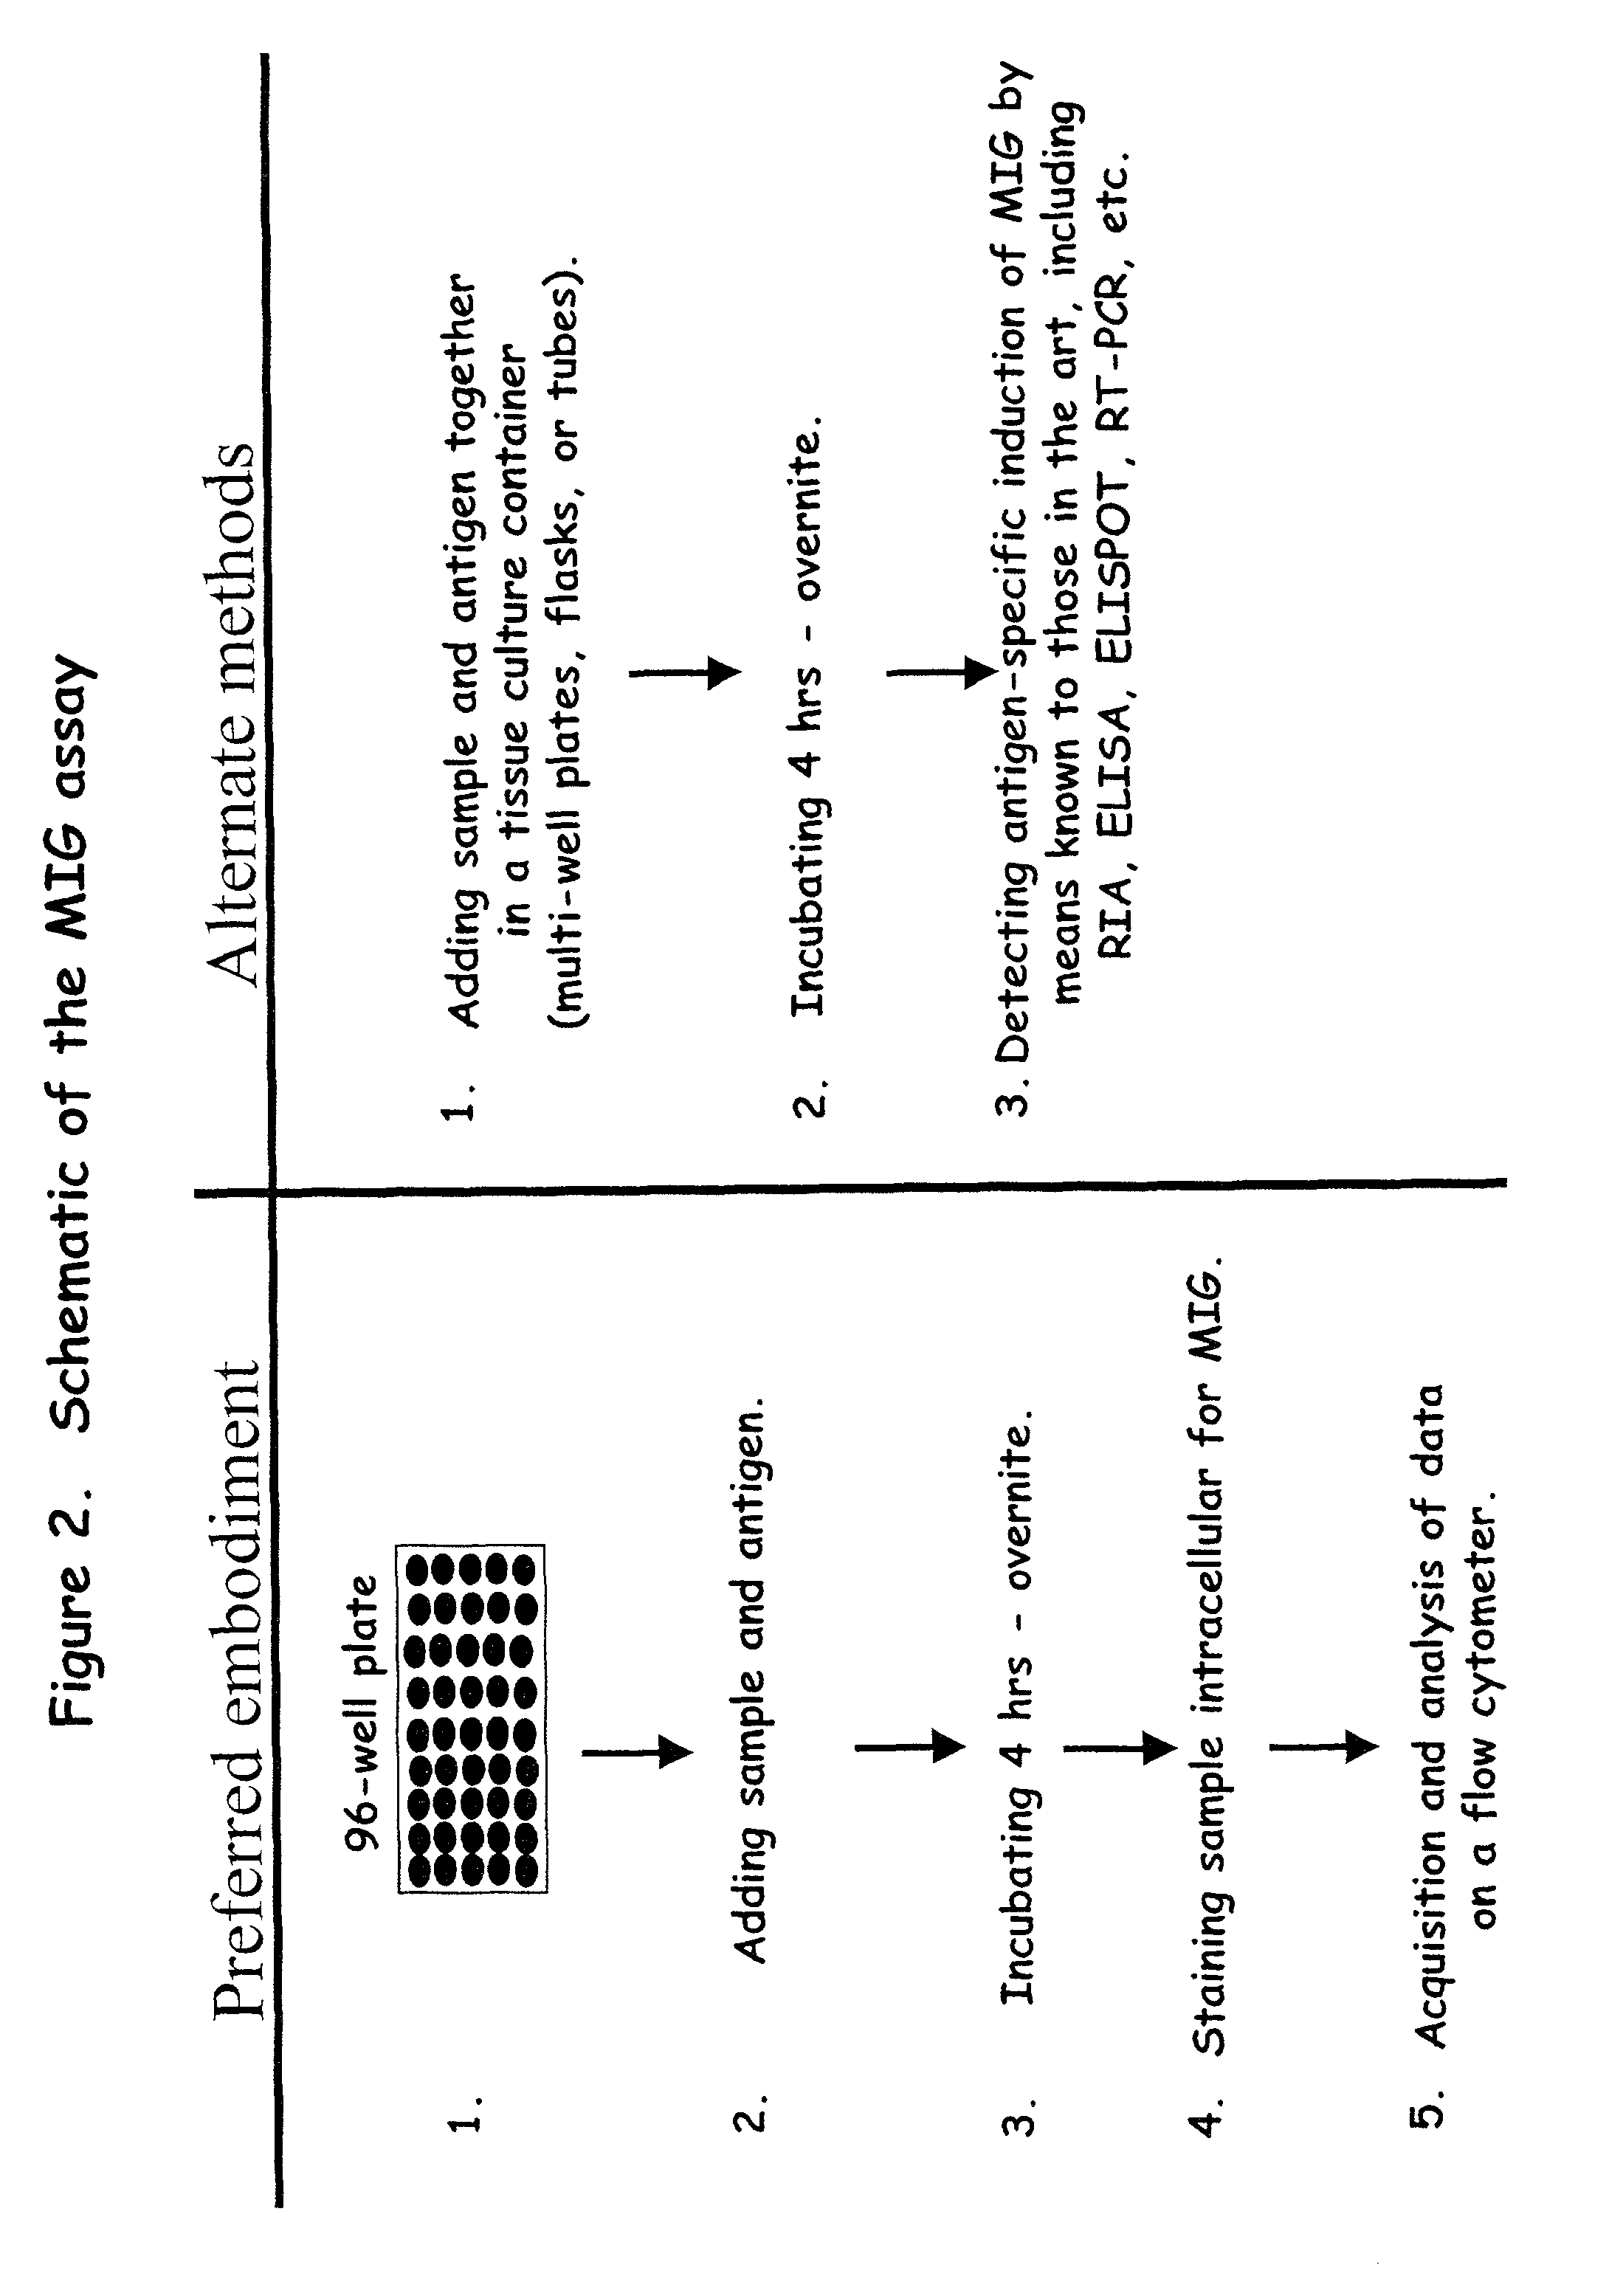 Assay for detecting immune responses involving antigen specific cytokine and/or antigen specific cytokine secreting T-cells